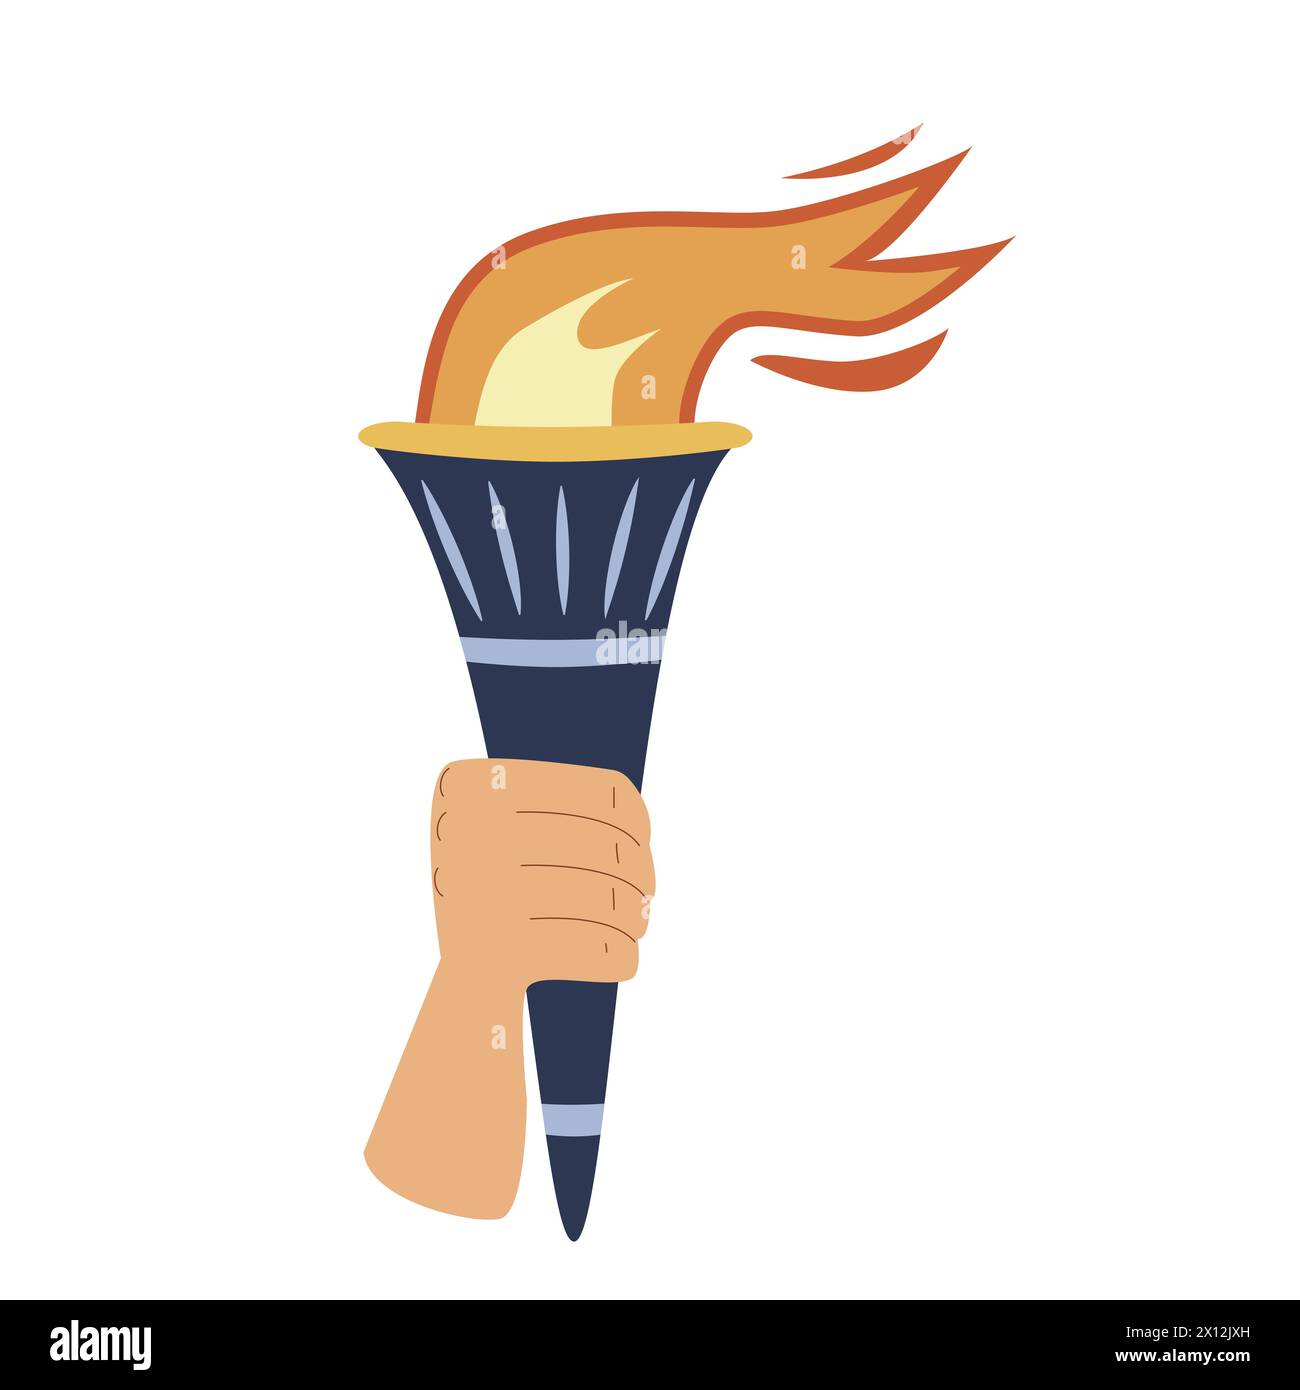 Torches with burning flame in hand. Symbol of sport, games, victory and champion competition holding human arm. Vector flat illustration. Stock Vector